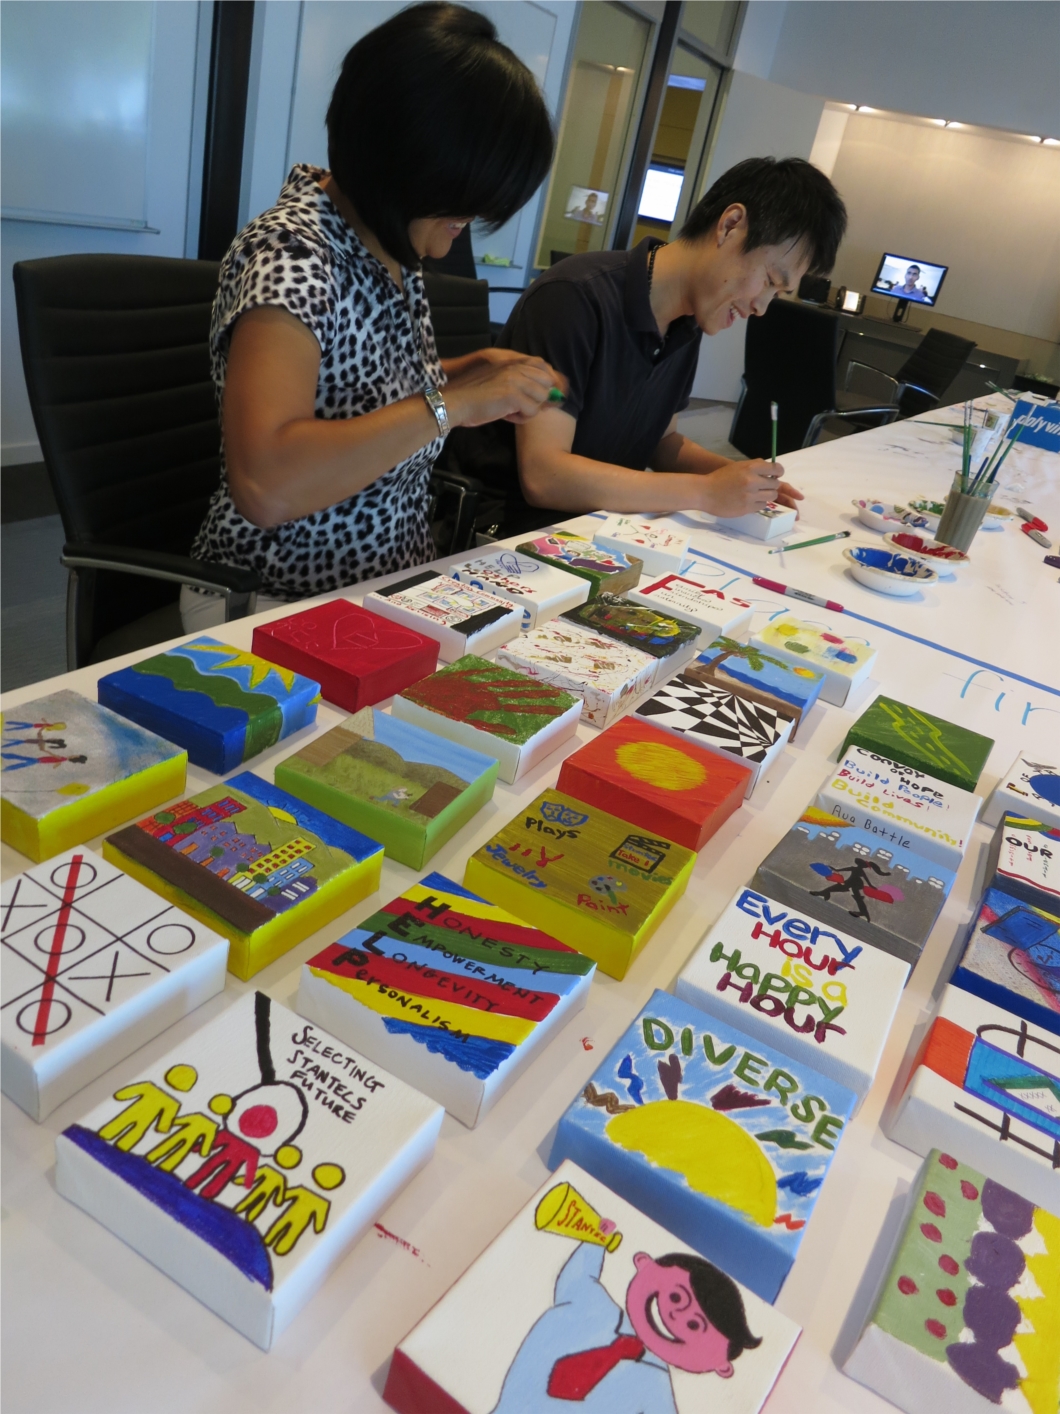 Each of the company’s Orange County employees painted “what inspires them in their careers” on a 5”X5” canvas during a June office dedication and 30th anniversary staff celebration. The finished canvases are displayed permanently in the “Employees’ Gallery” in the firm's Irvine office. 